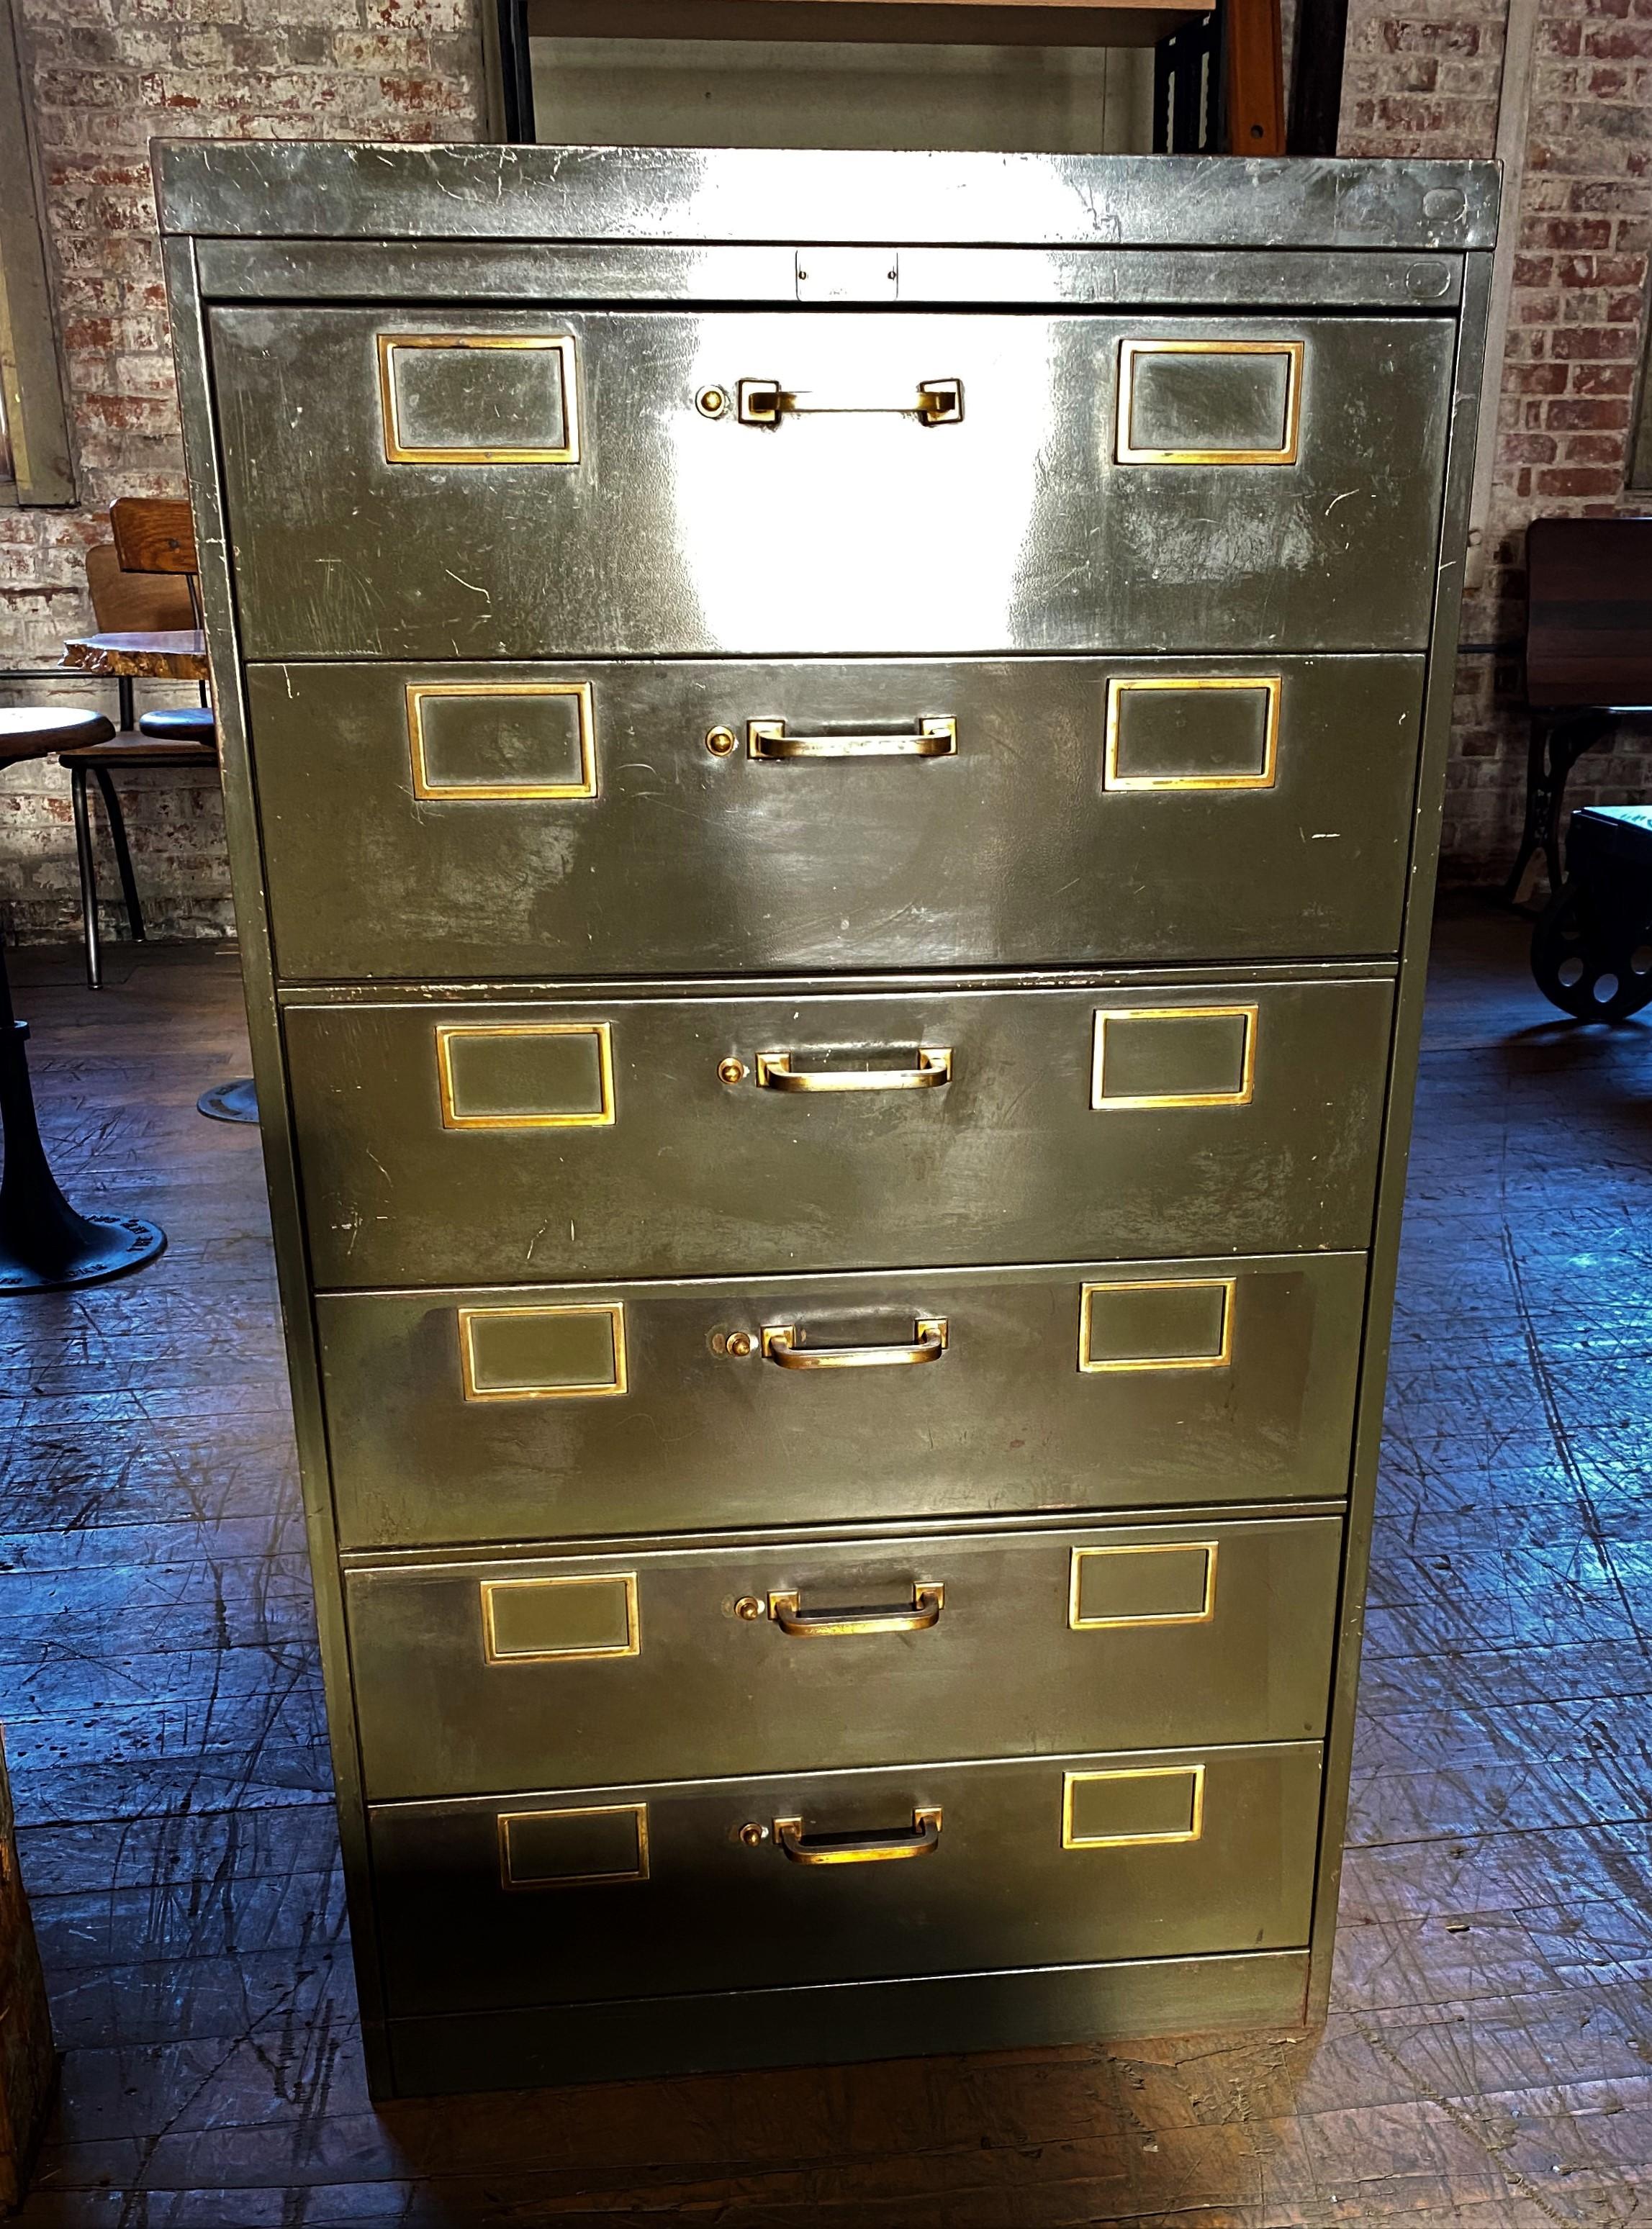 General Fireproofing Co. vintage industrial green 5 drawer cabinet
Overall dimensions: 28